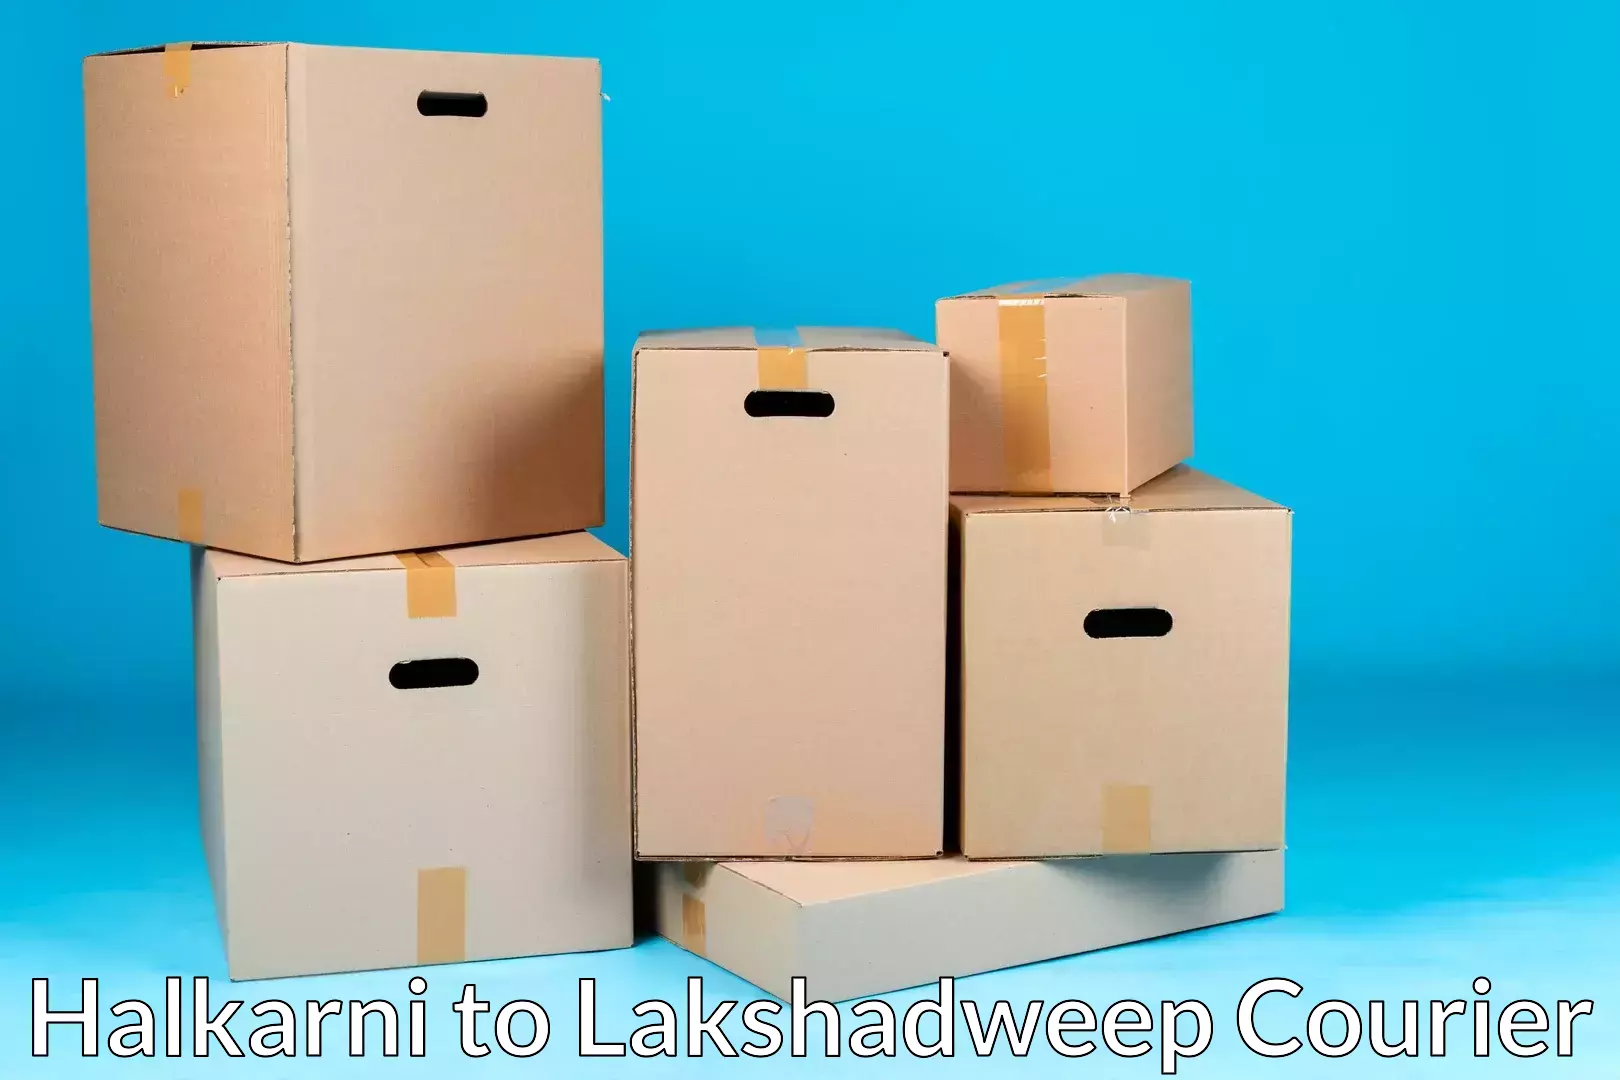 Quality moving services in Halkarni to Lakshadweep